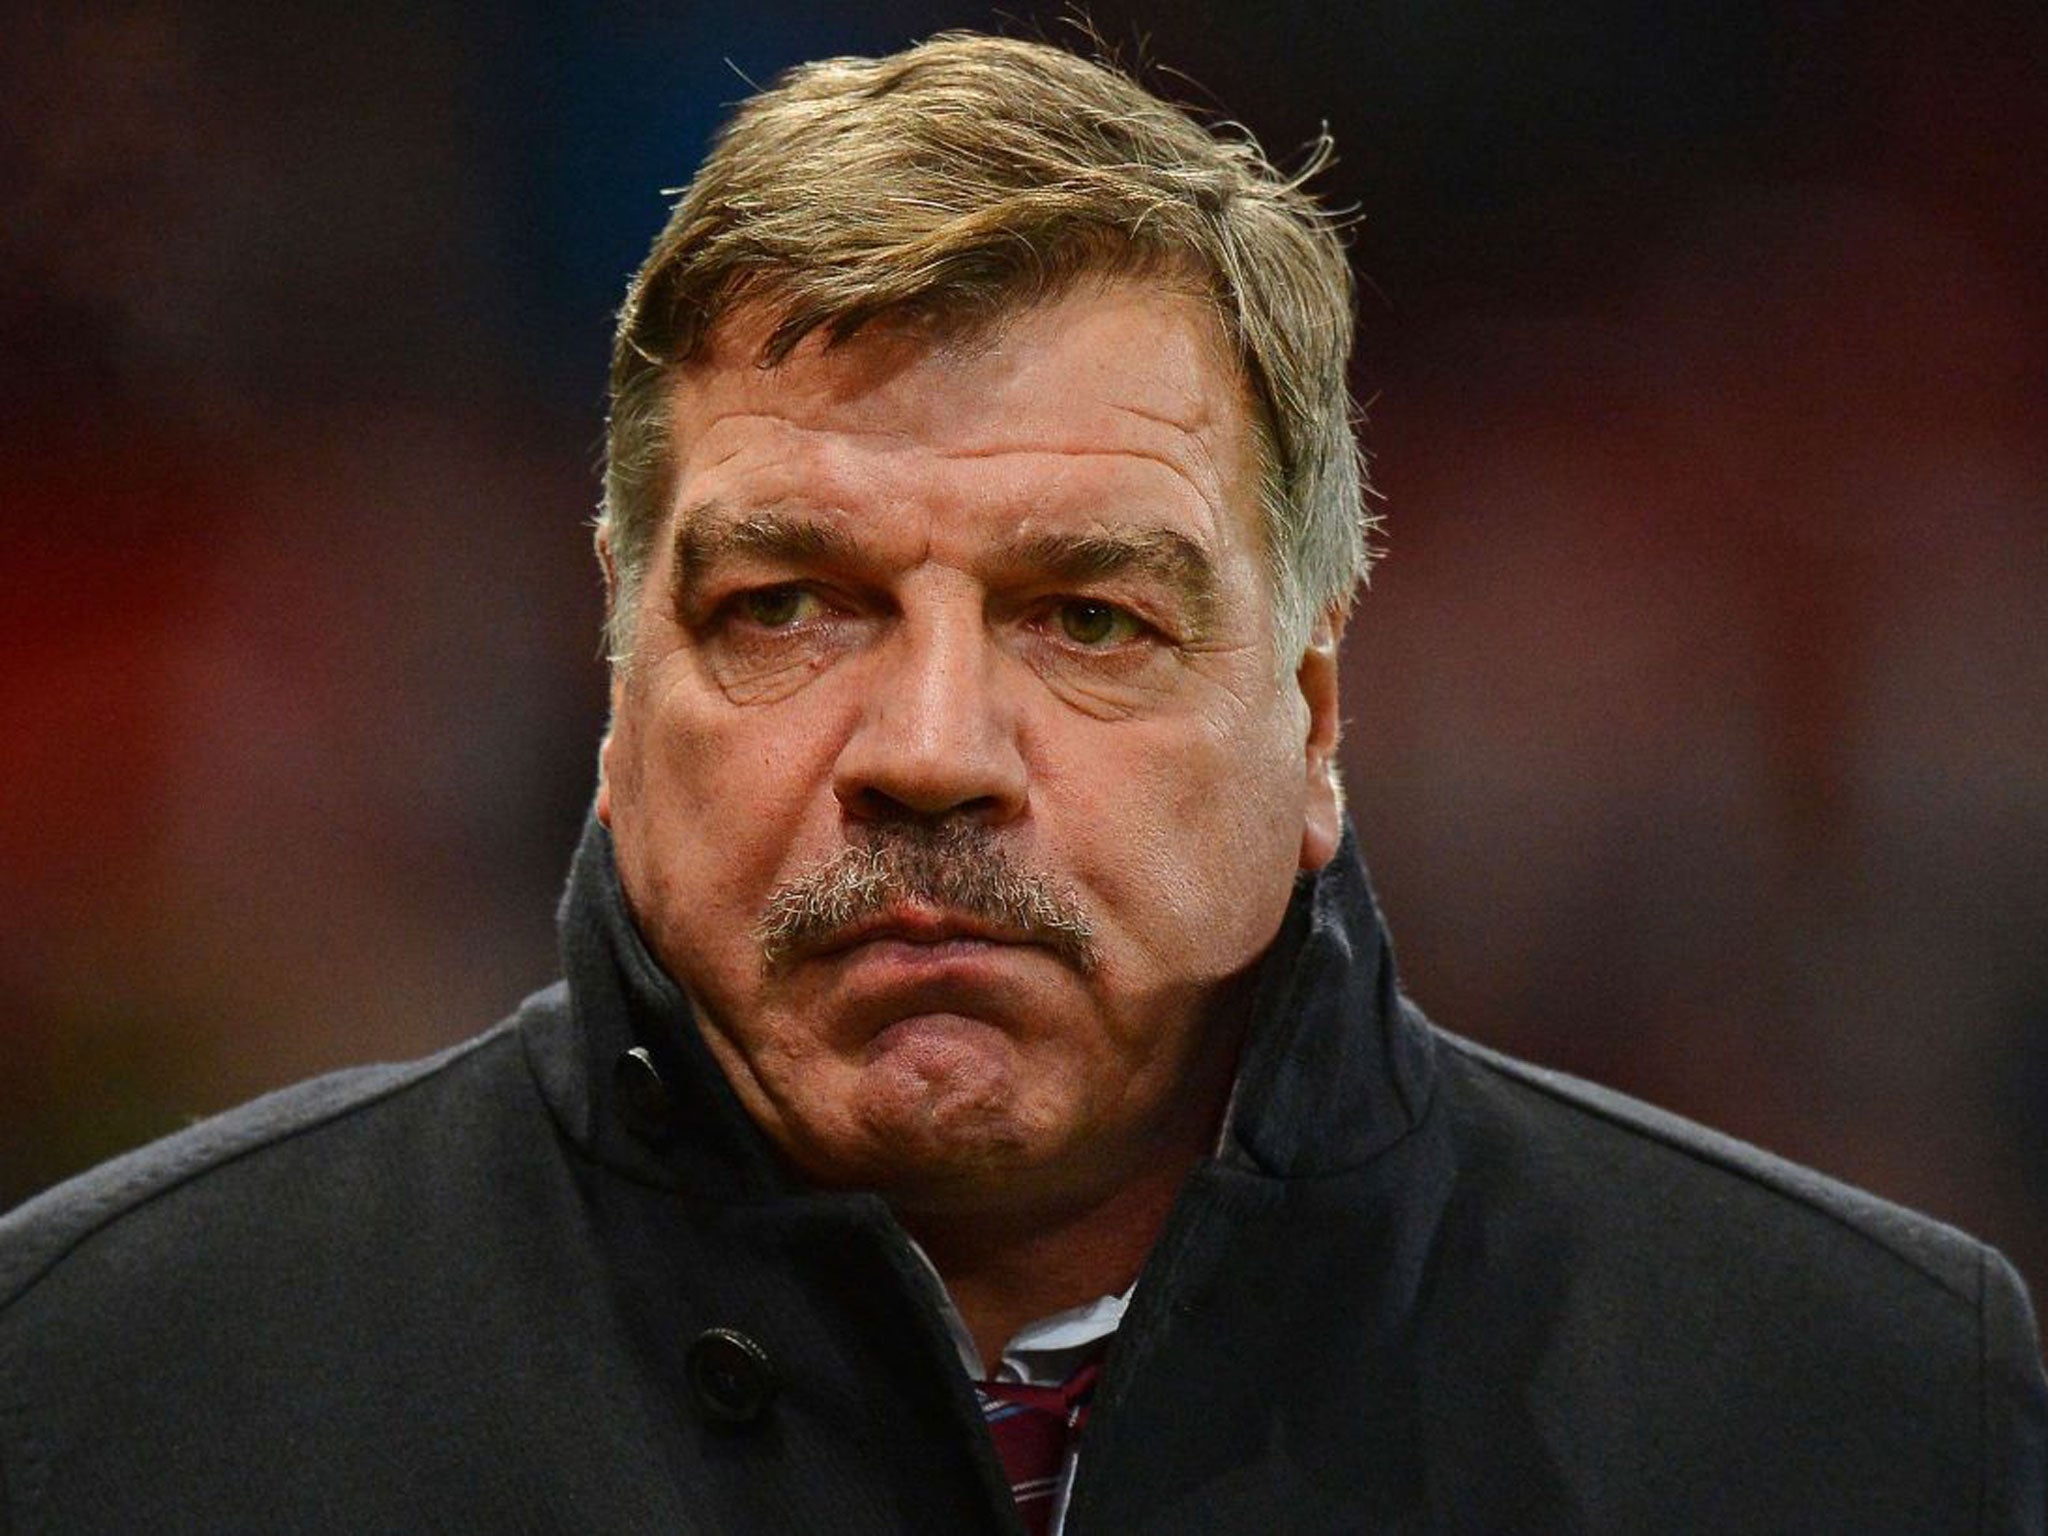 Sam Allardyce: The West Ham manager hopes to see the club build ‘a new history’